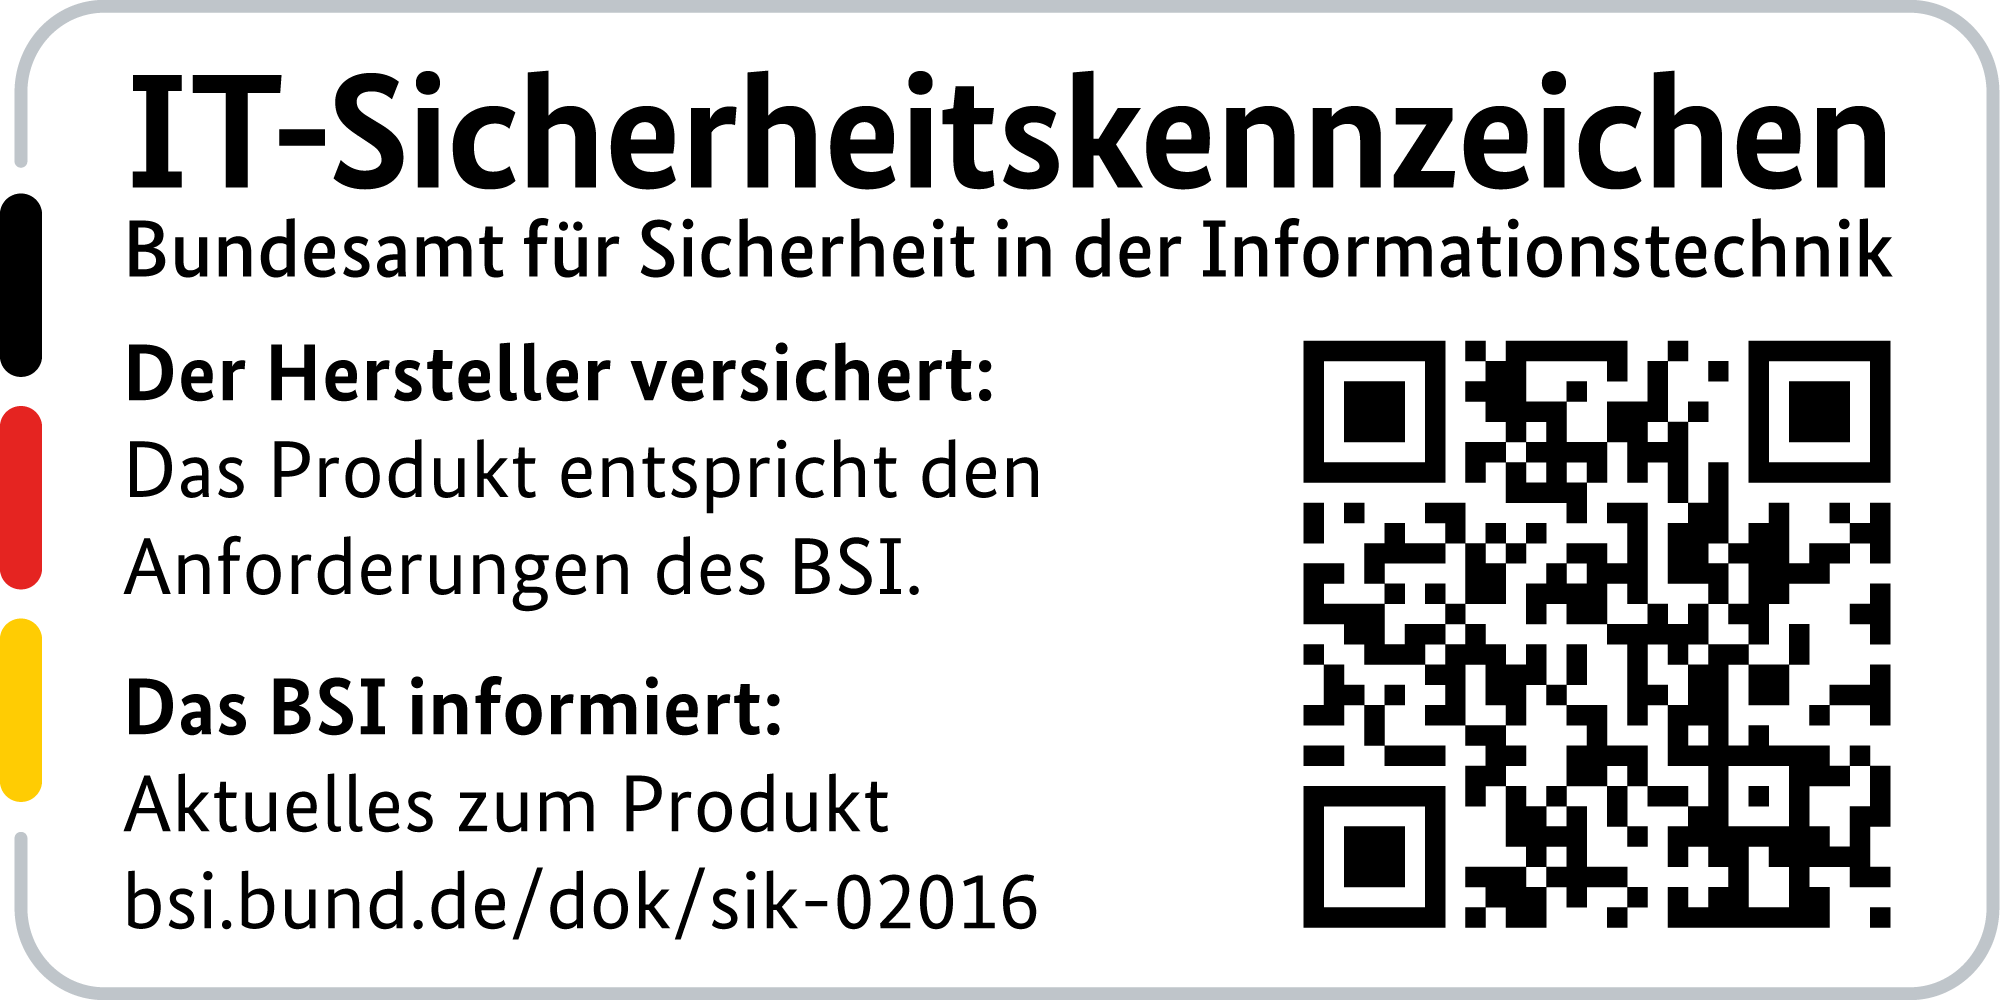 IT Security Label with QR code of the German BSI for LANCOM 730-4G+